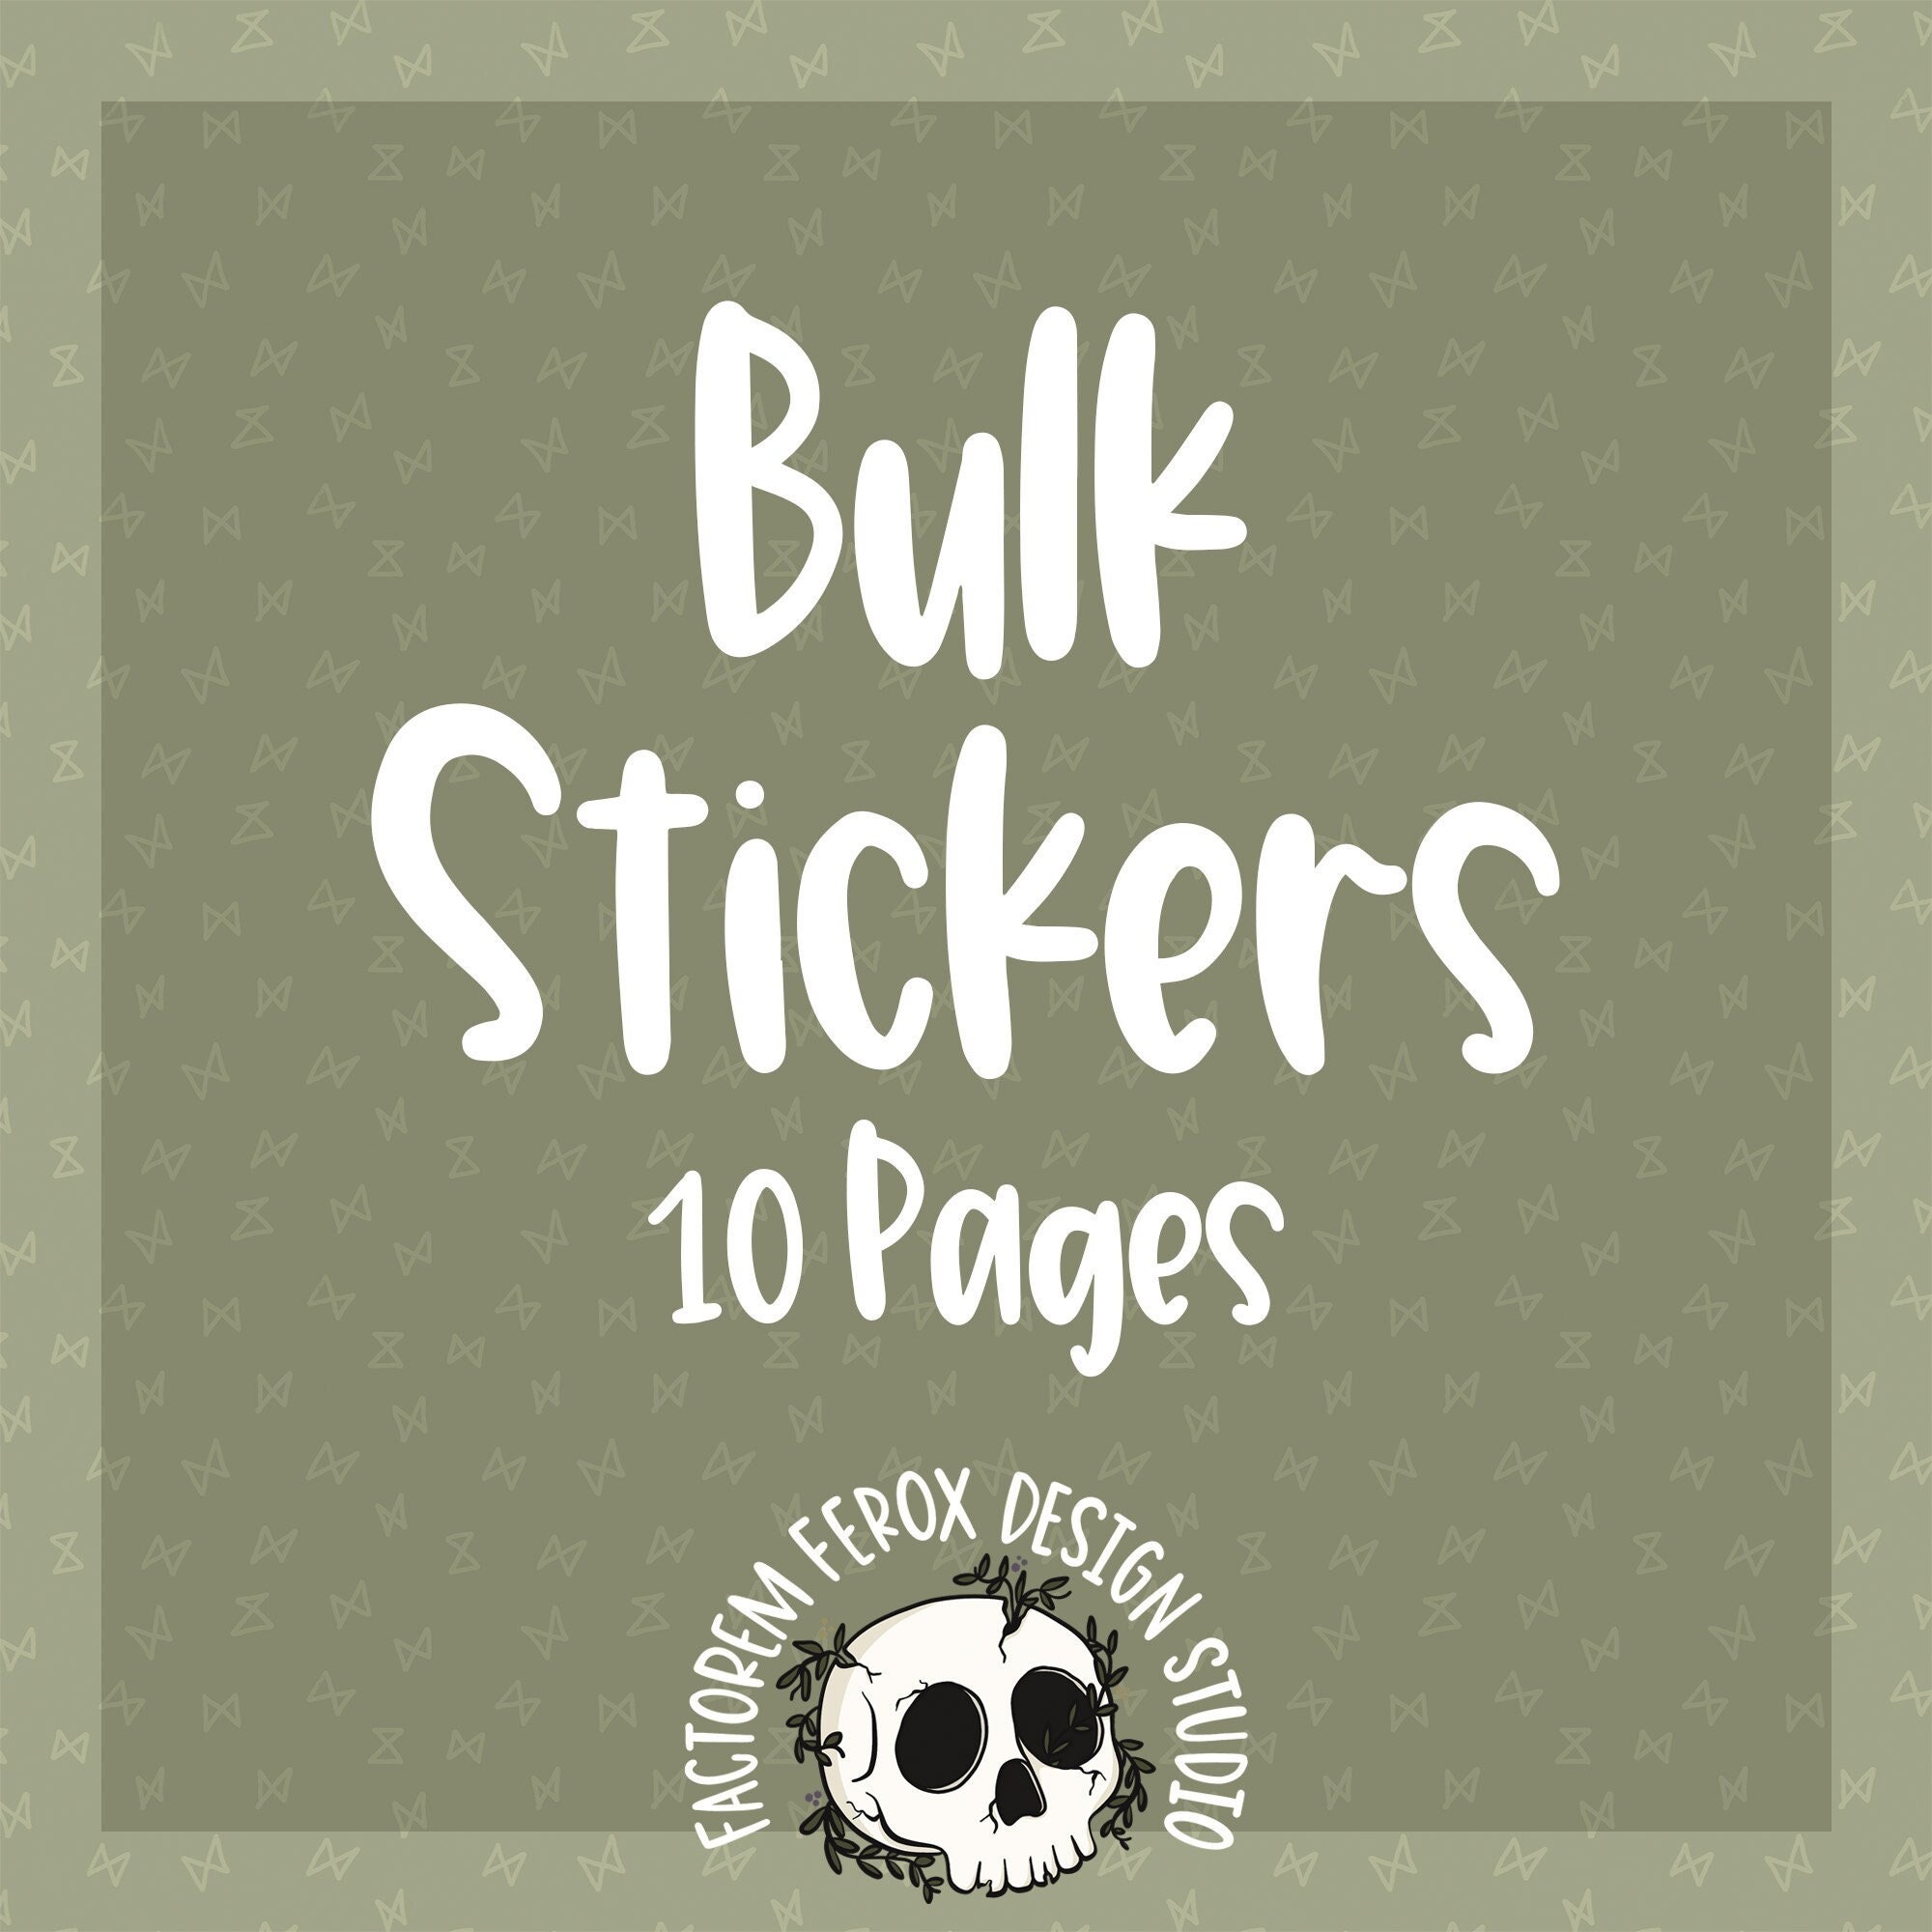 Bulk Stickers, 10 Sheets, Thank You Stickers, Wholesale Stickers